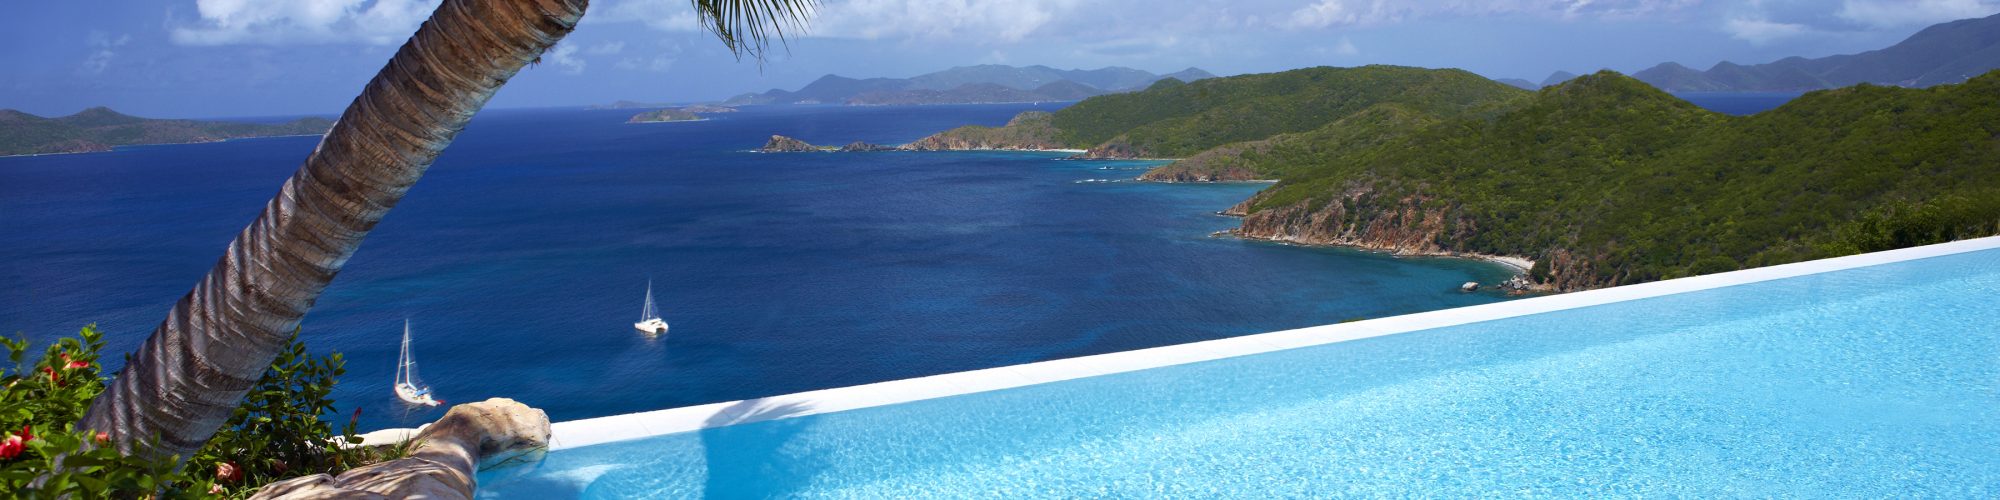 Pool of the Falcon's Nest Villa on PETER ISLAND